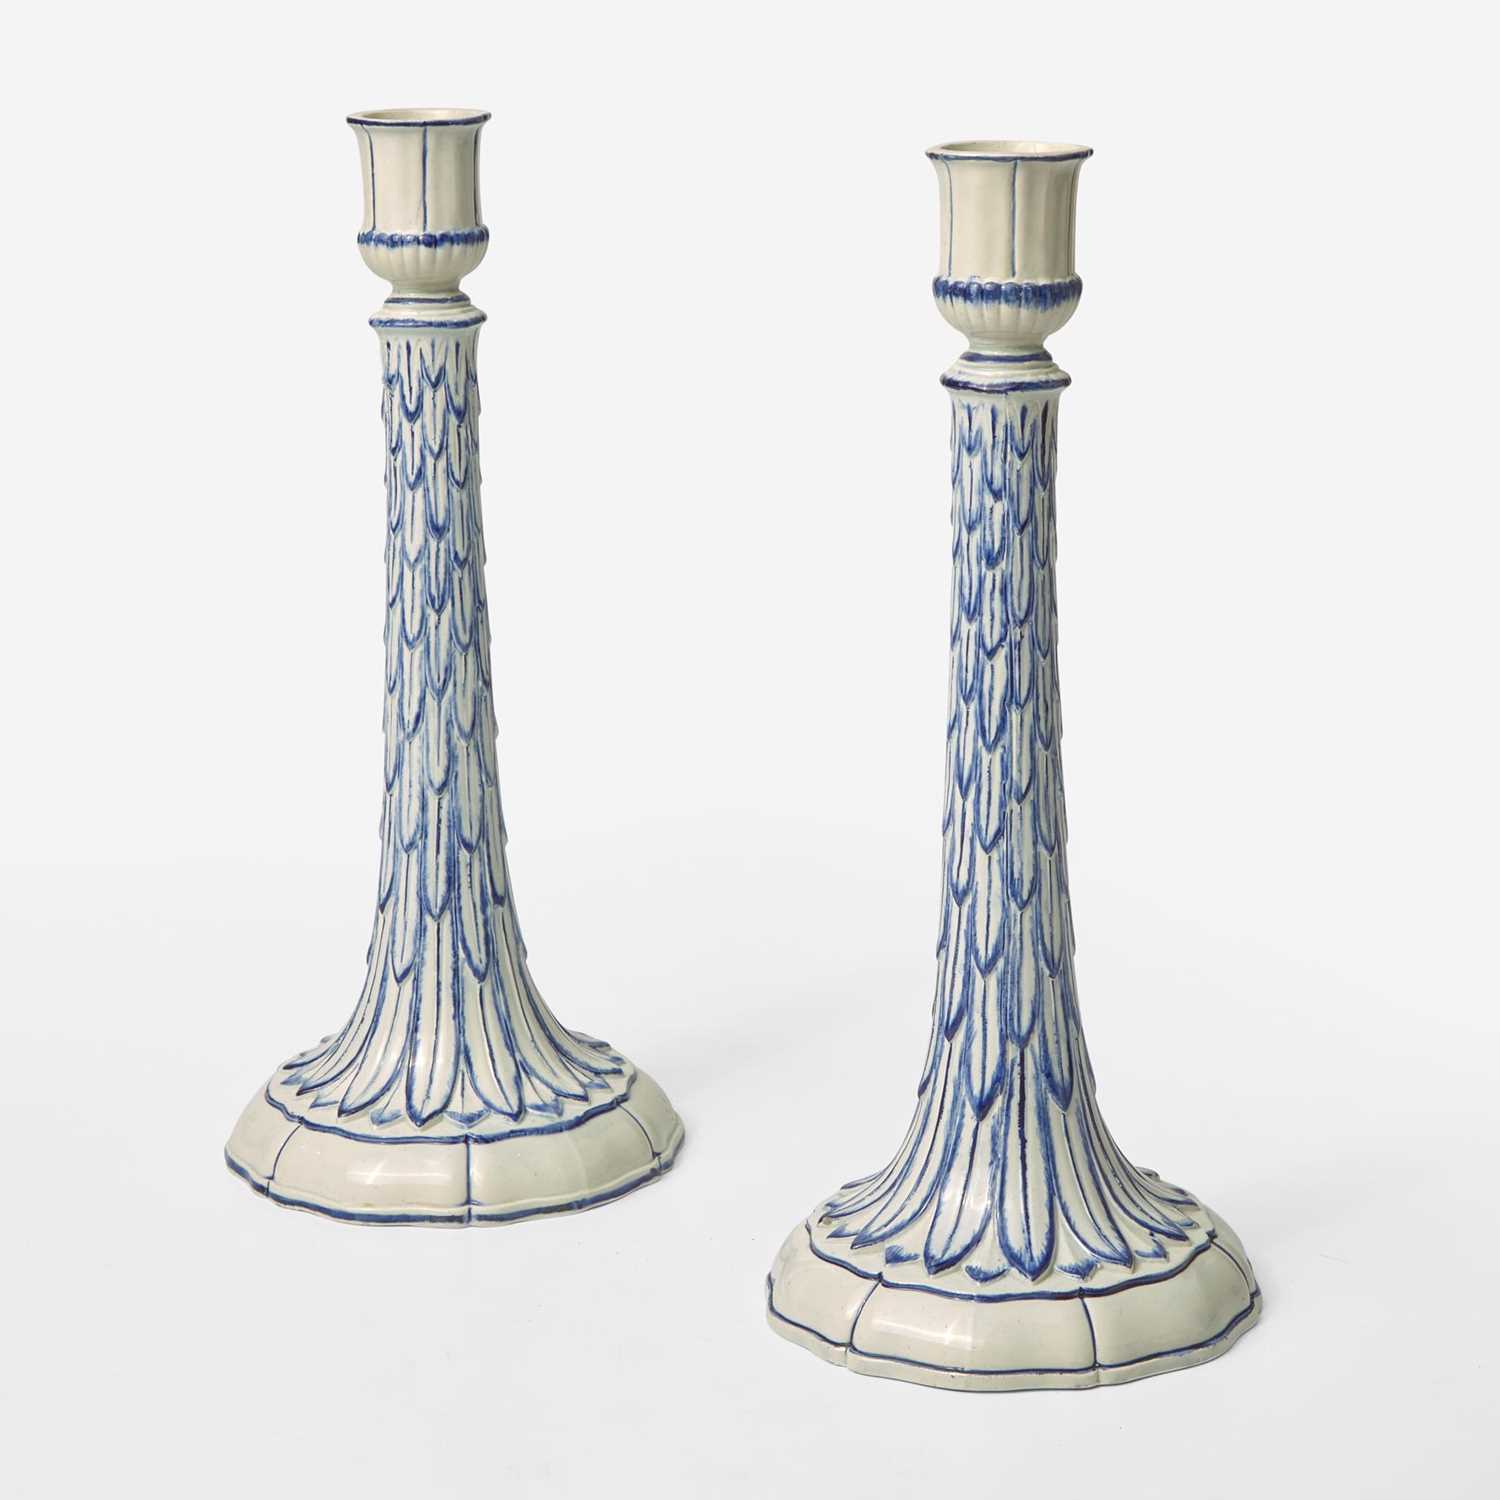 Lot 6 - A Pair of Wedgwood Queensware Candlesticks